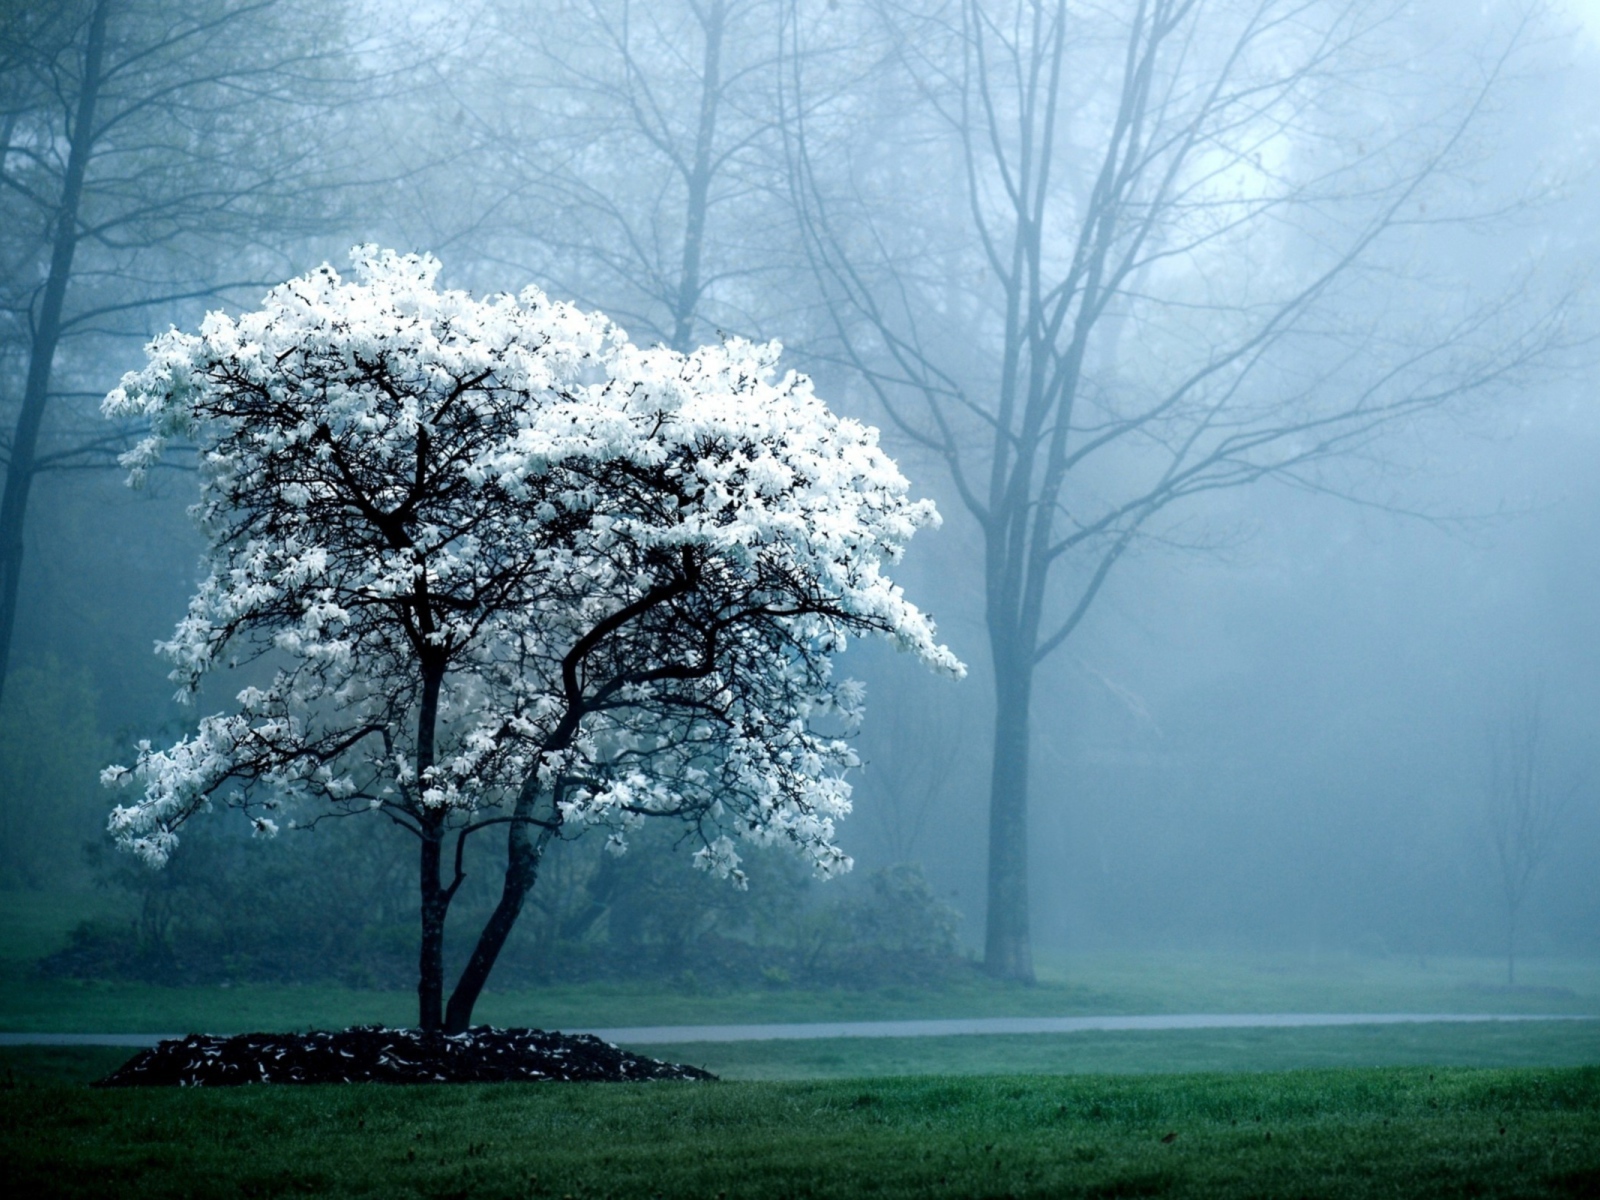 Foggy weather in the spring forest